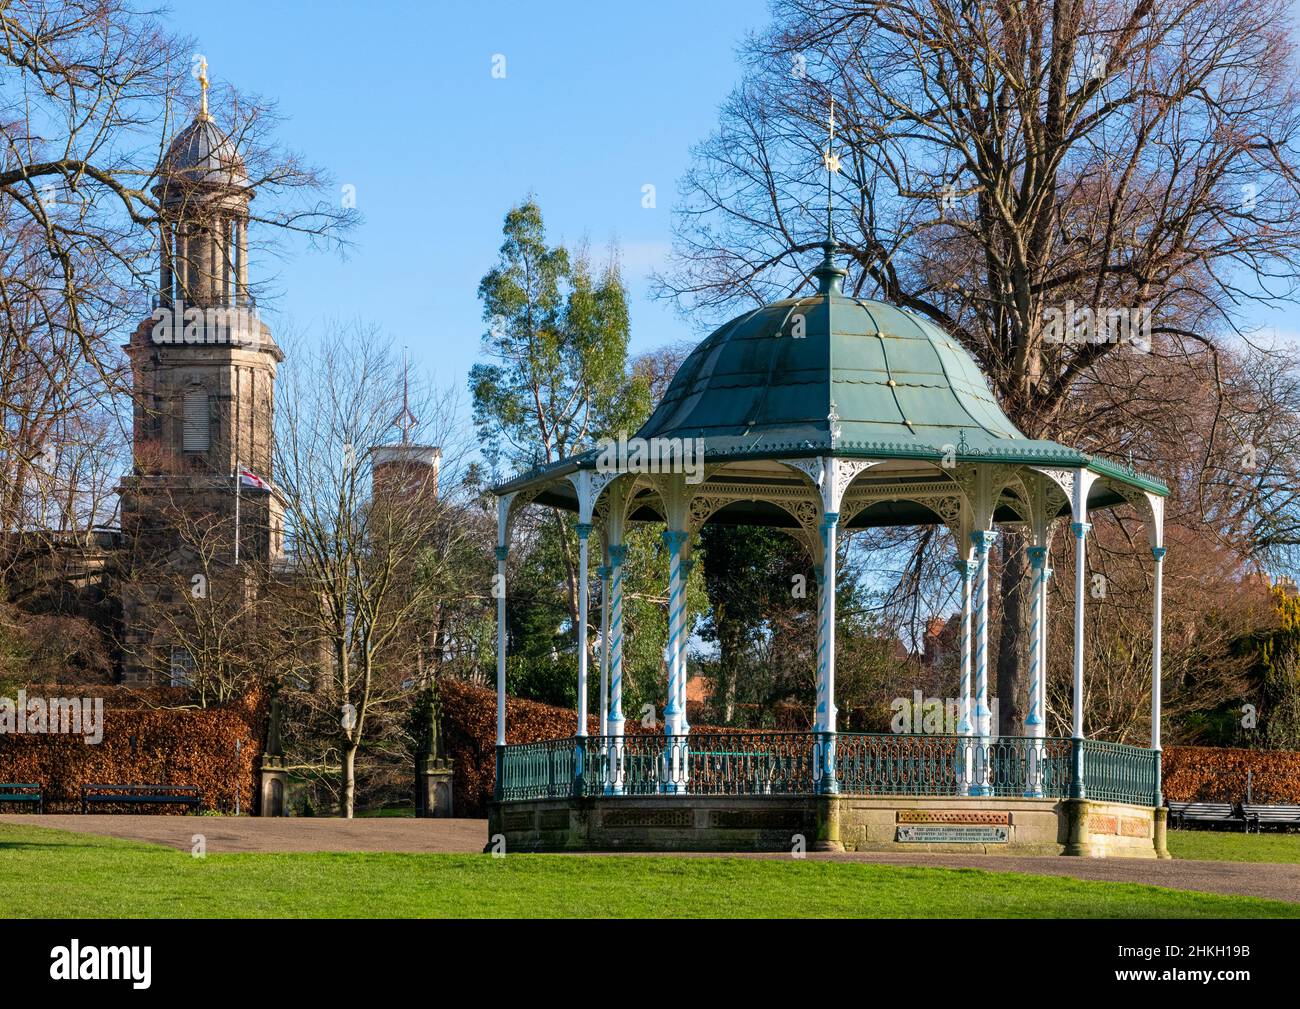 The bandstand in the Quarry, overlooked by St Chad's Church, Shrewsbury, Shropshire. Stock Photo